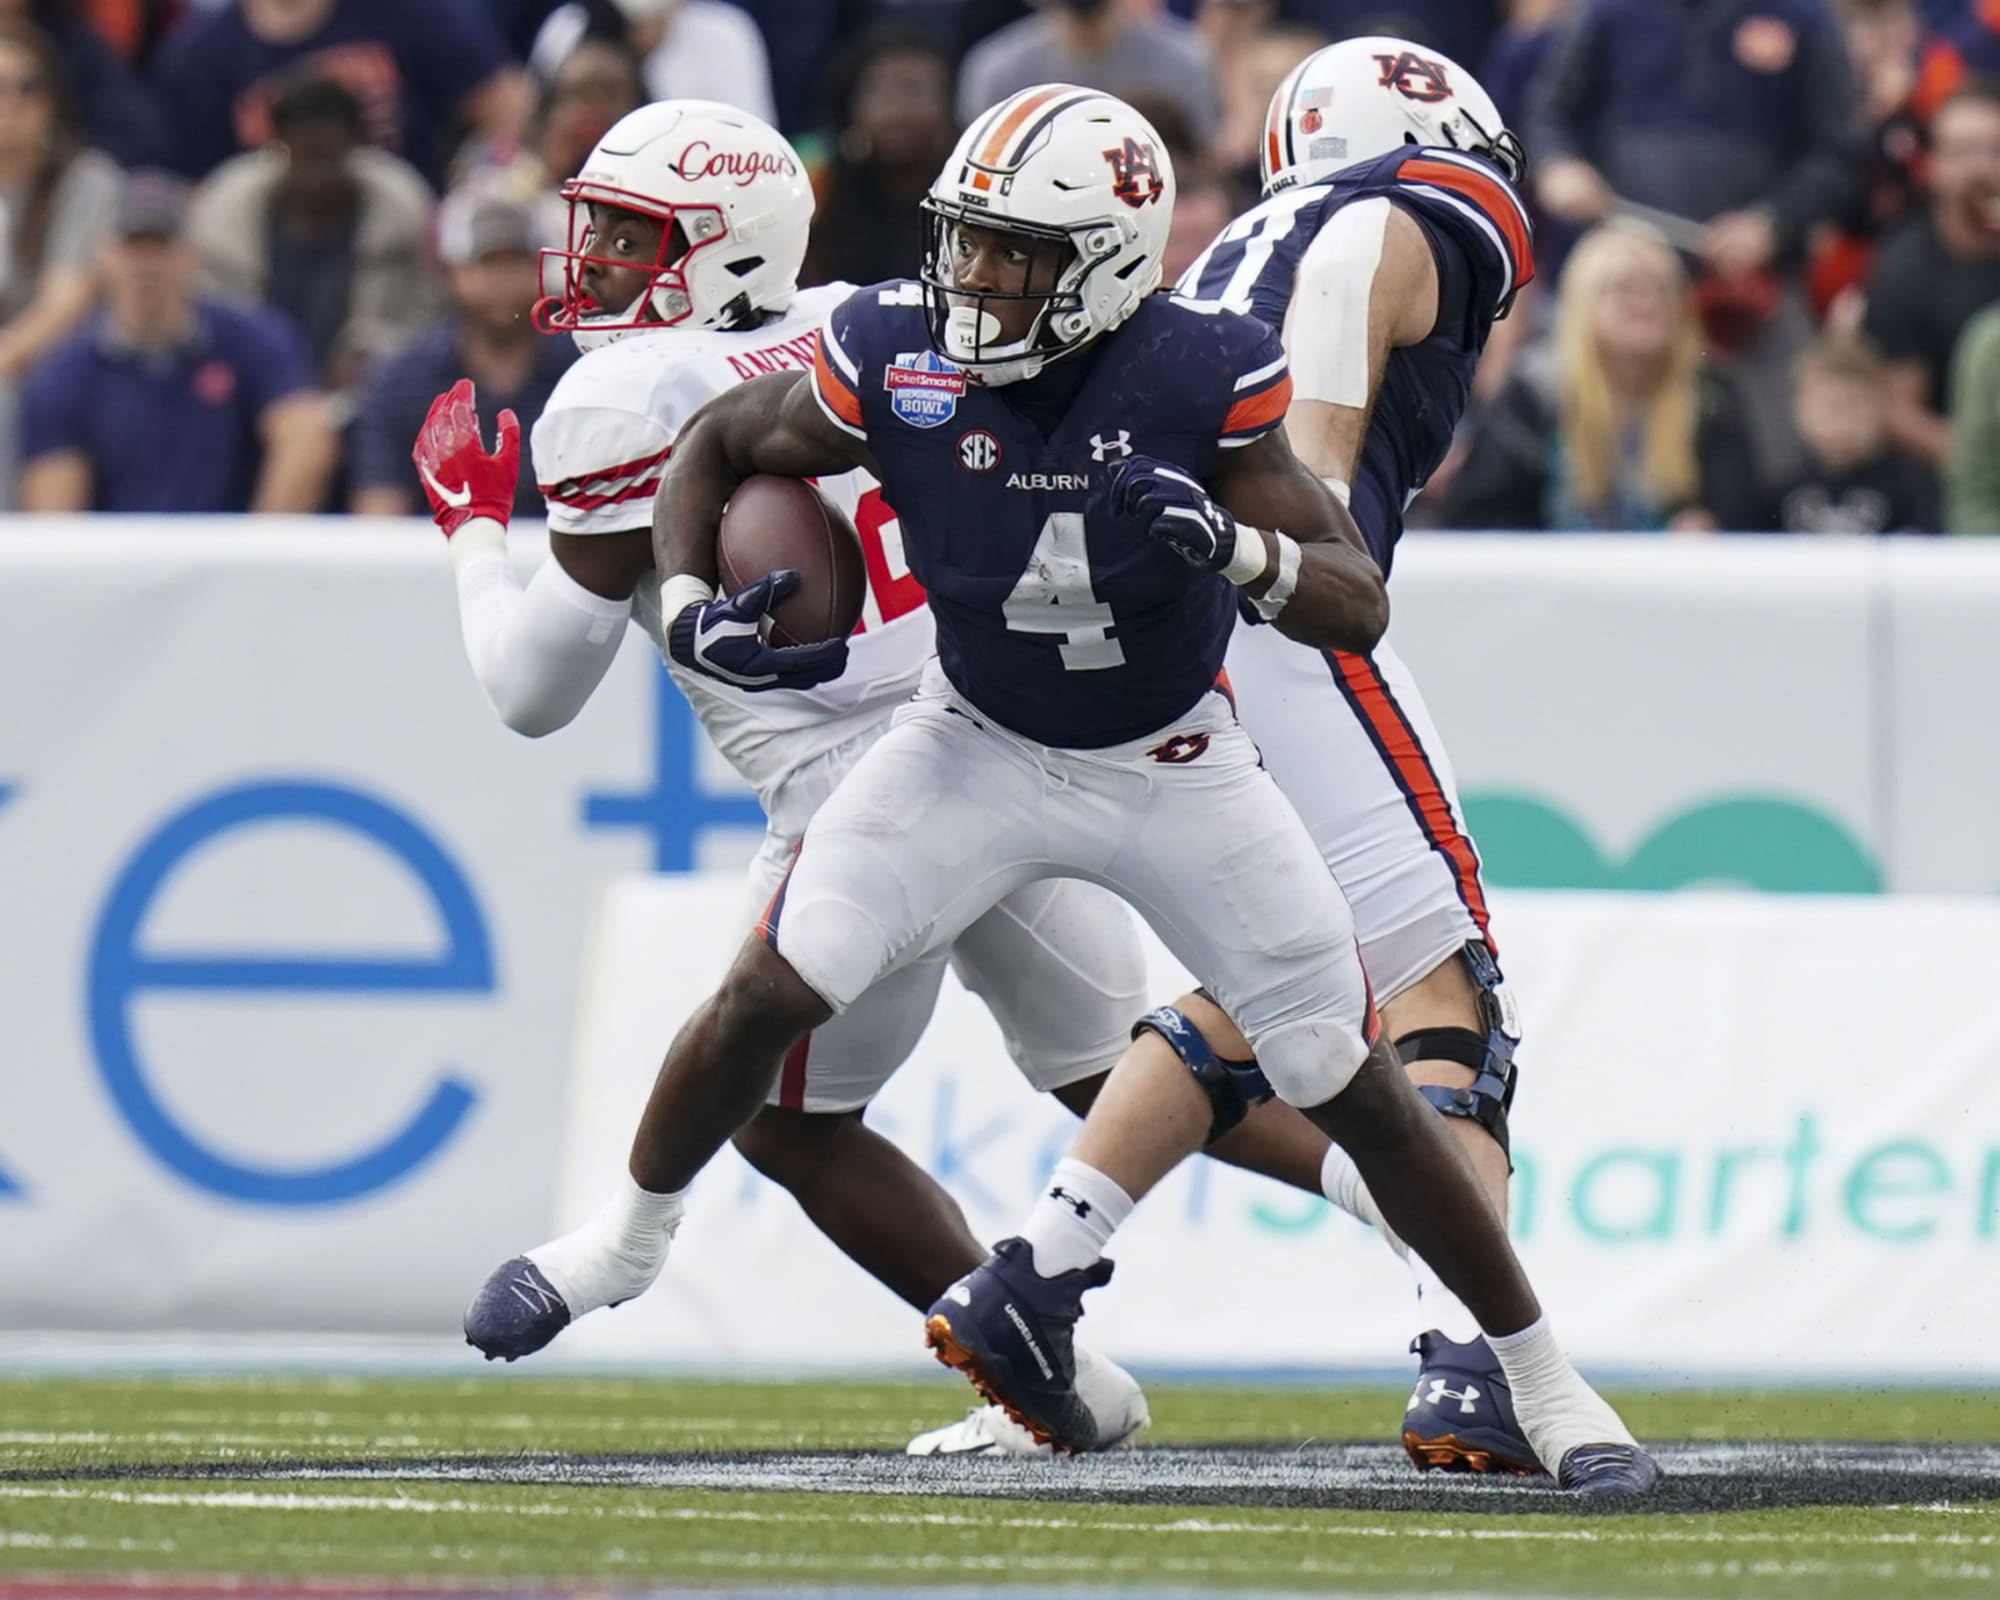 How to watch Auburn Tigers football in 2022